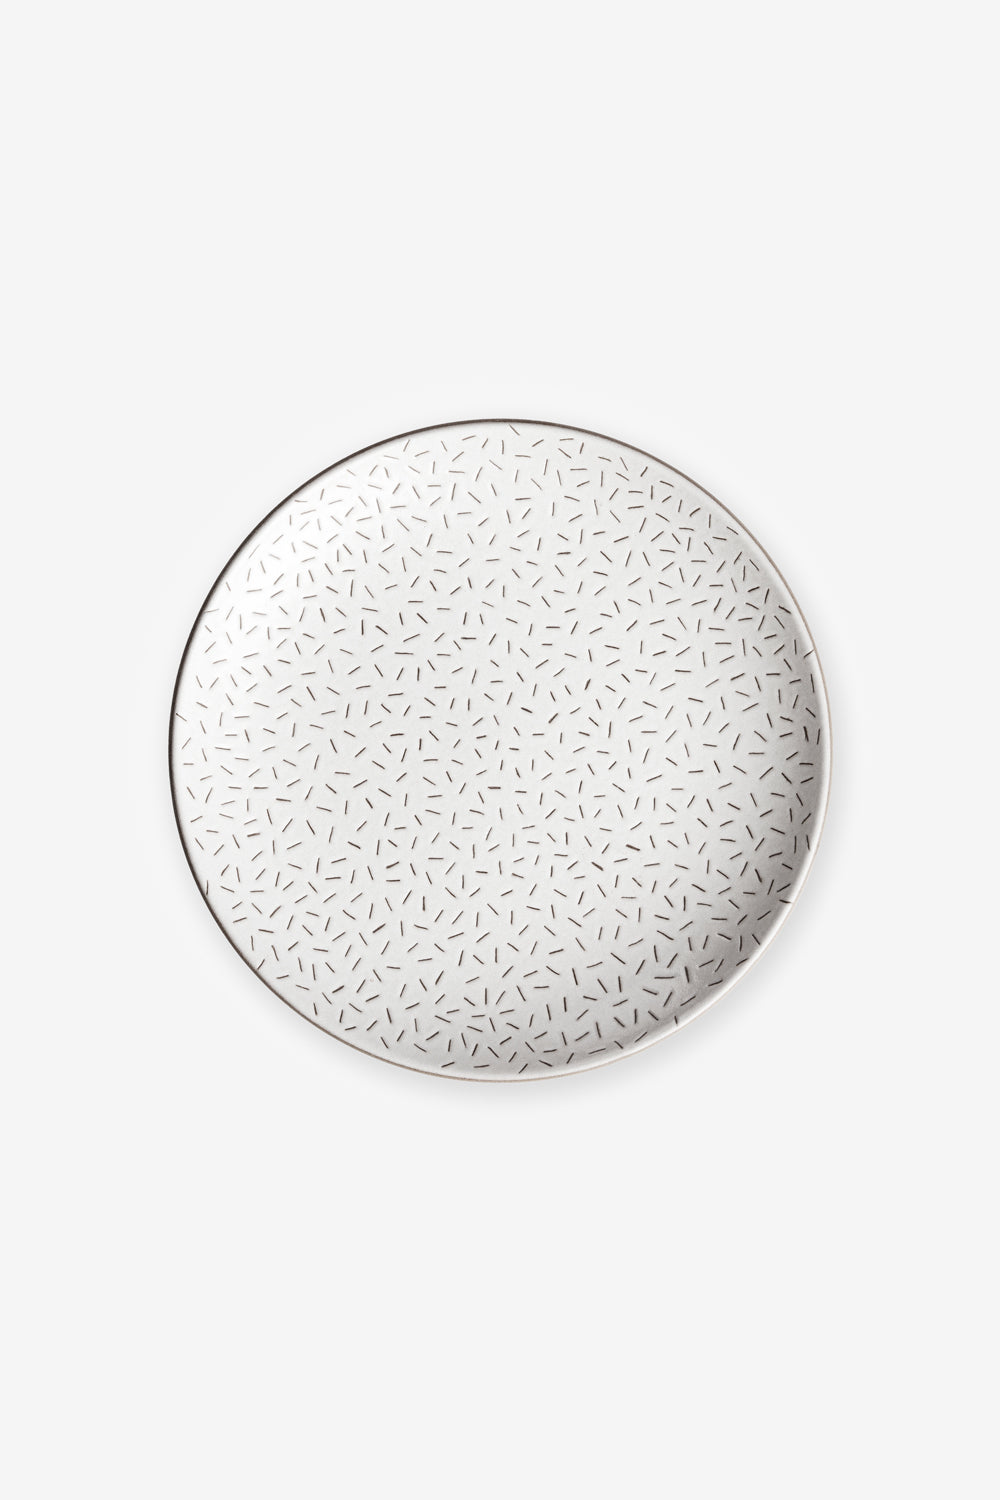 Etched Seed Stitch Salad Plate from Magnolia Dinnerware Set in Opaque White from Alabama Chanin and Heath Ceramics Collaboration